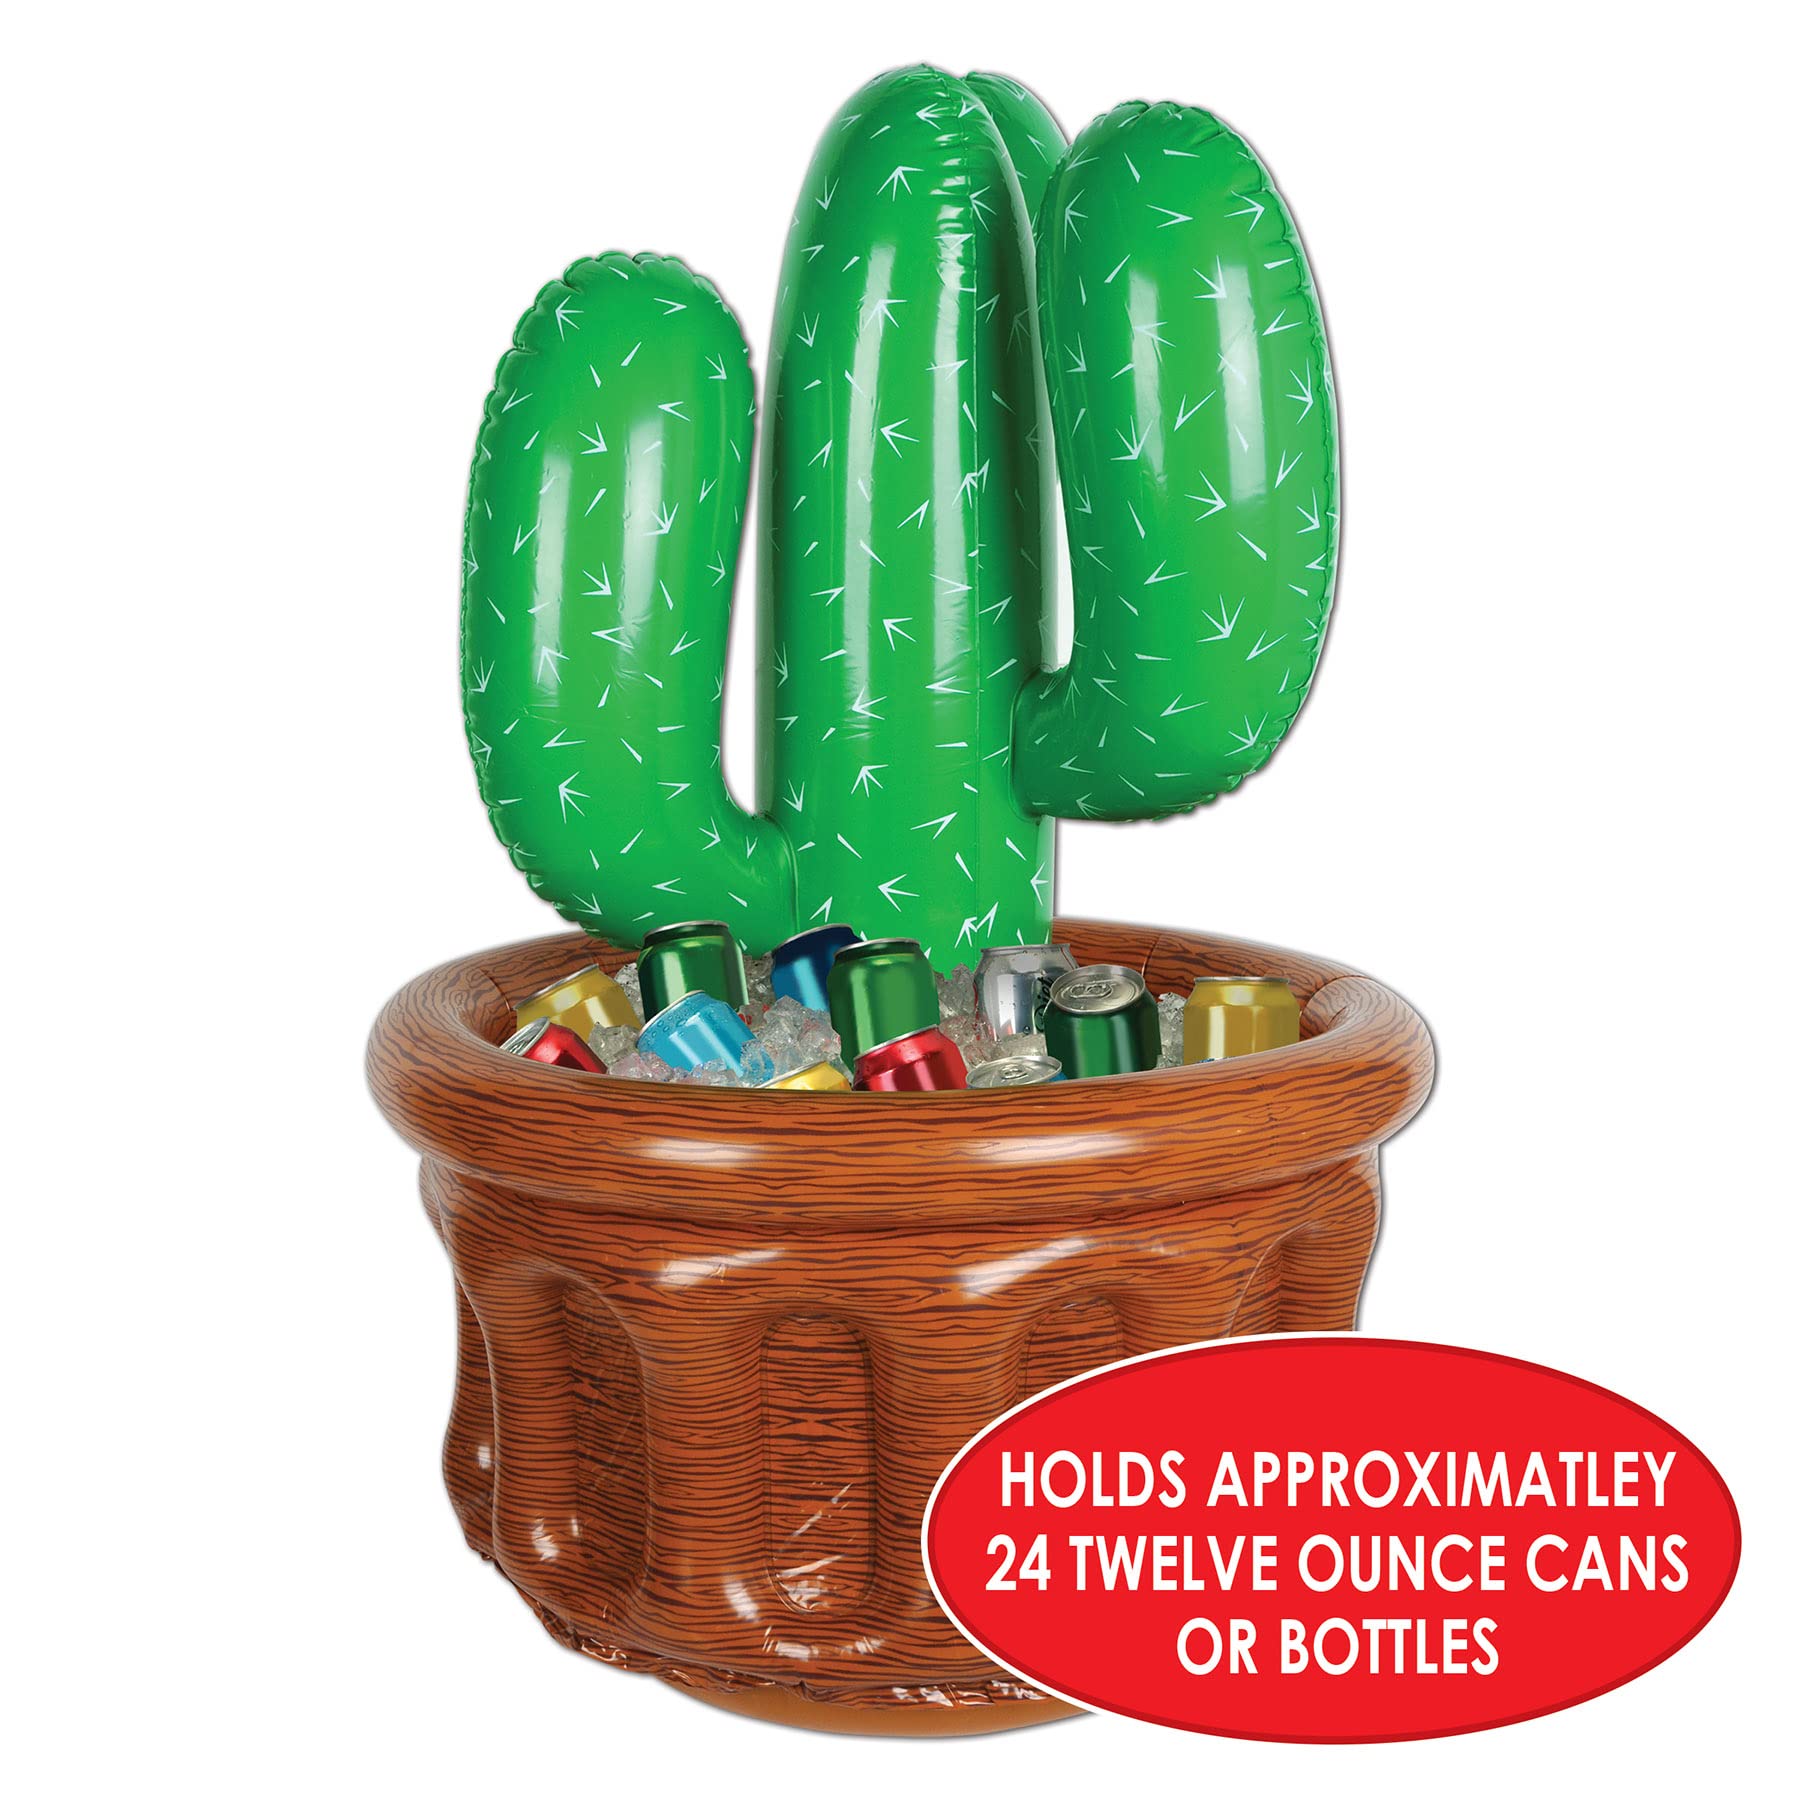 Beistle Inflatable Cactus Coolers, 2 Pack, 26” x 18”, Each Holds Approx. 24 12 oz. Cans - Drink Cooler, Drink Containers for Parties, Cactus Party Decorations, Western Fiesta Party Decorations